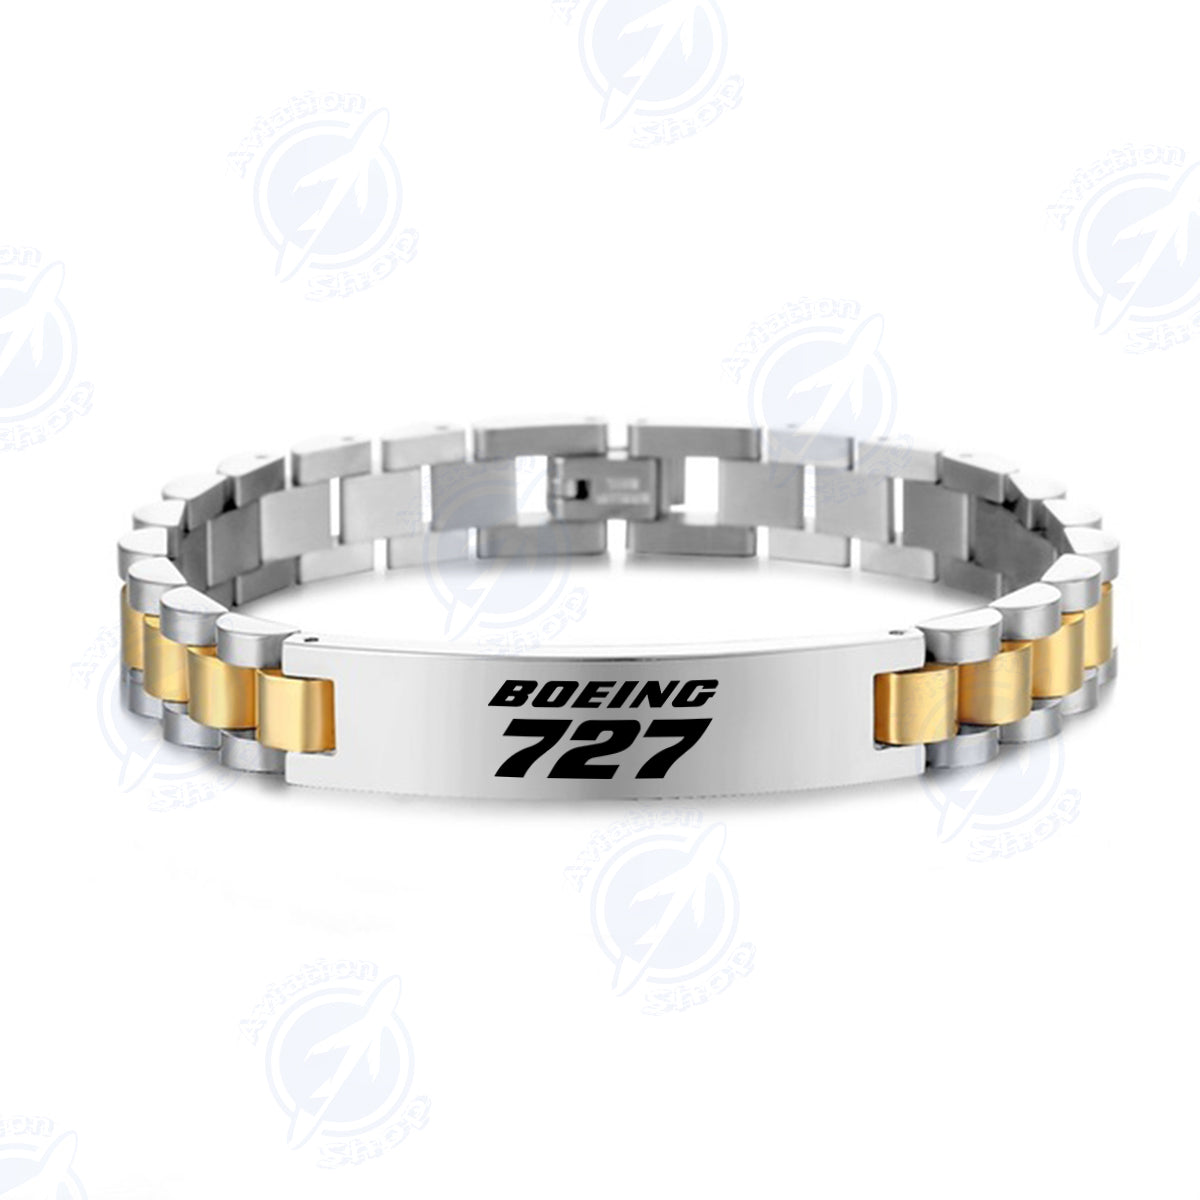 Boeing 727 & Text Designed Stainless Steel Chain Bracelets